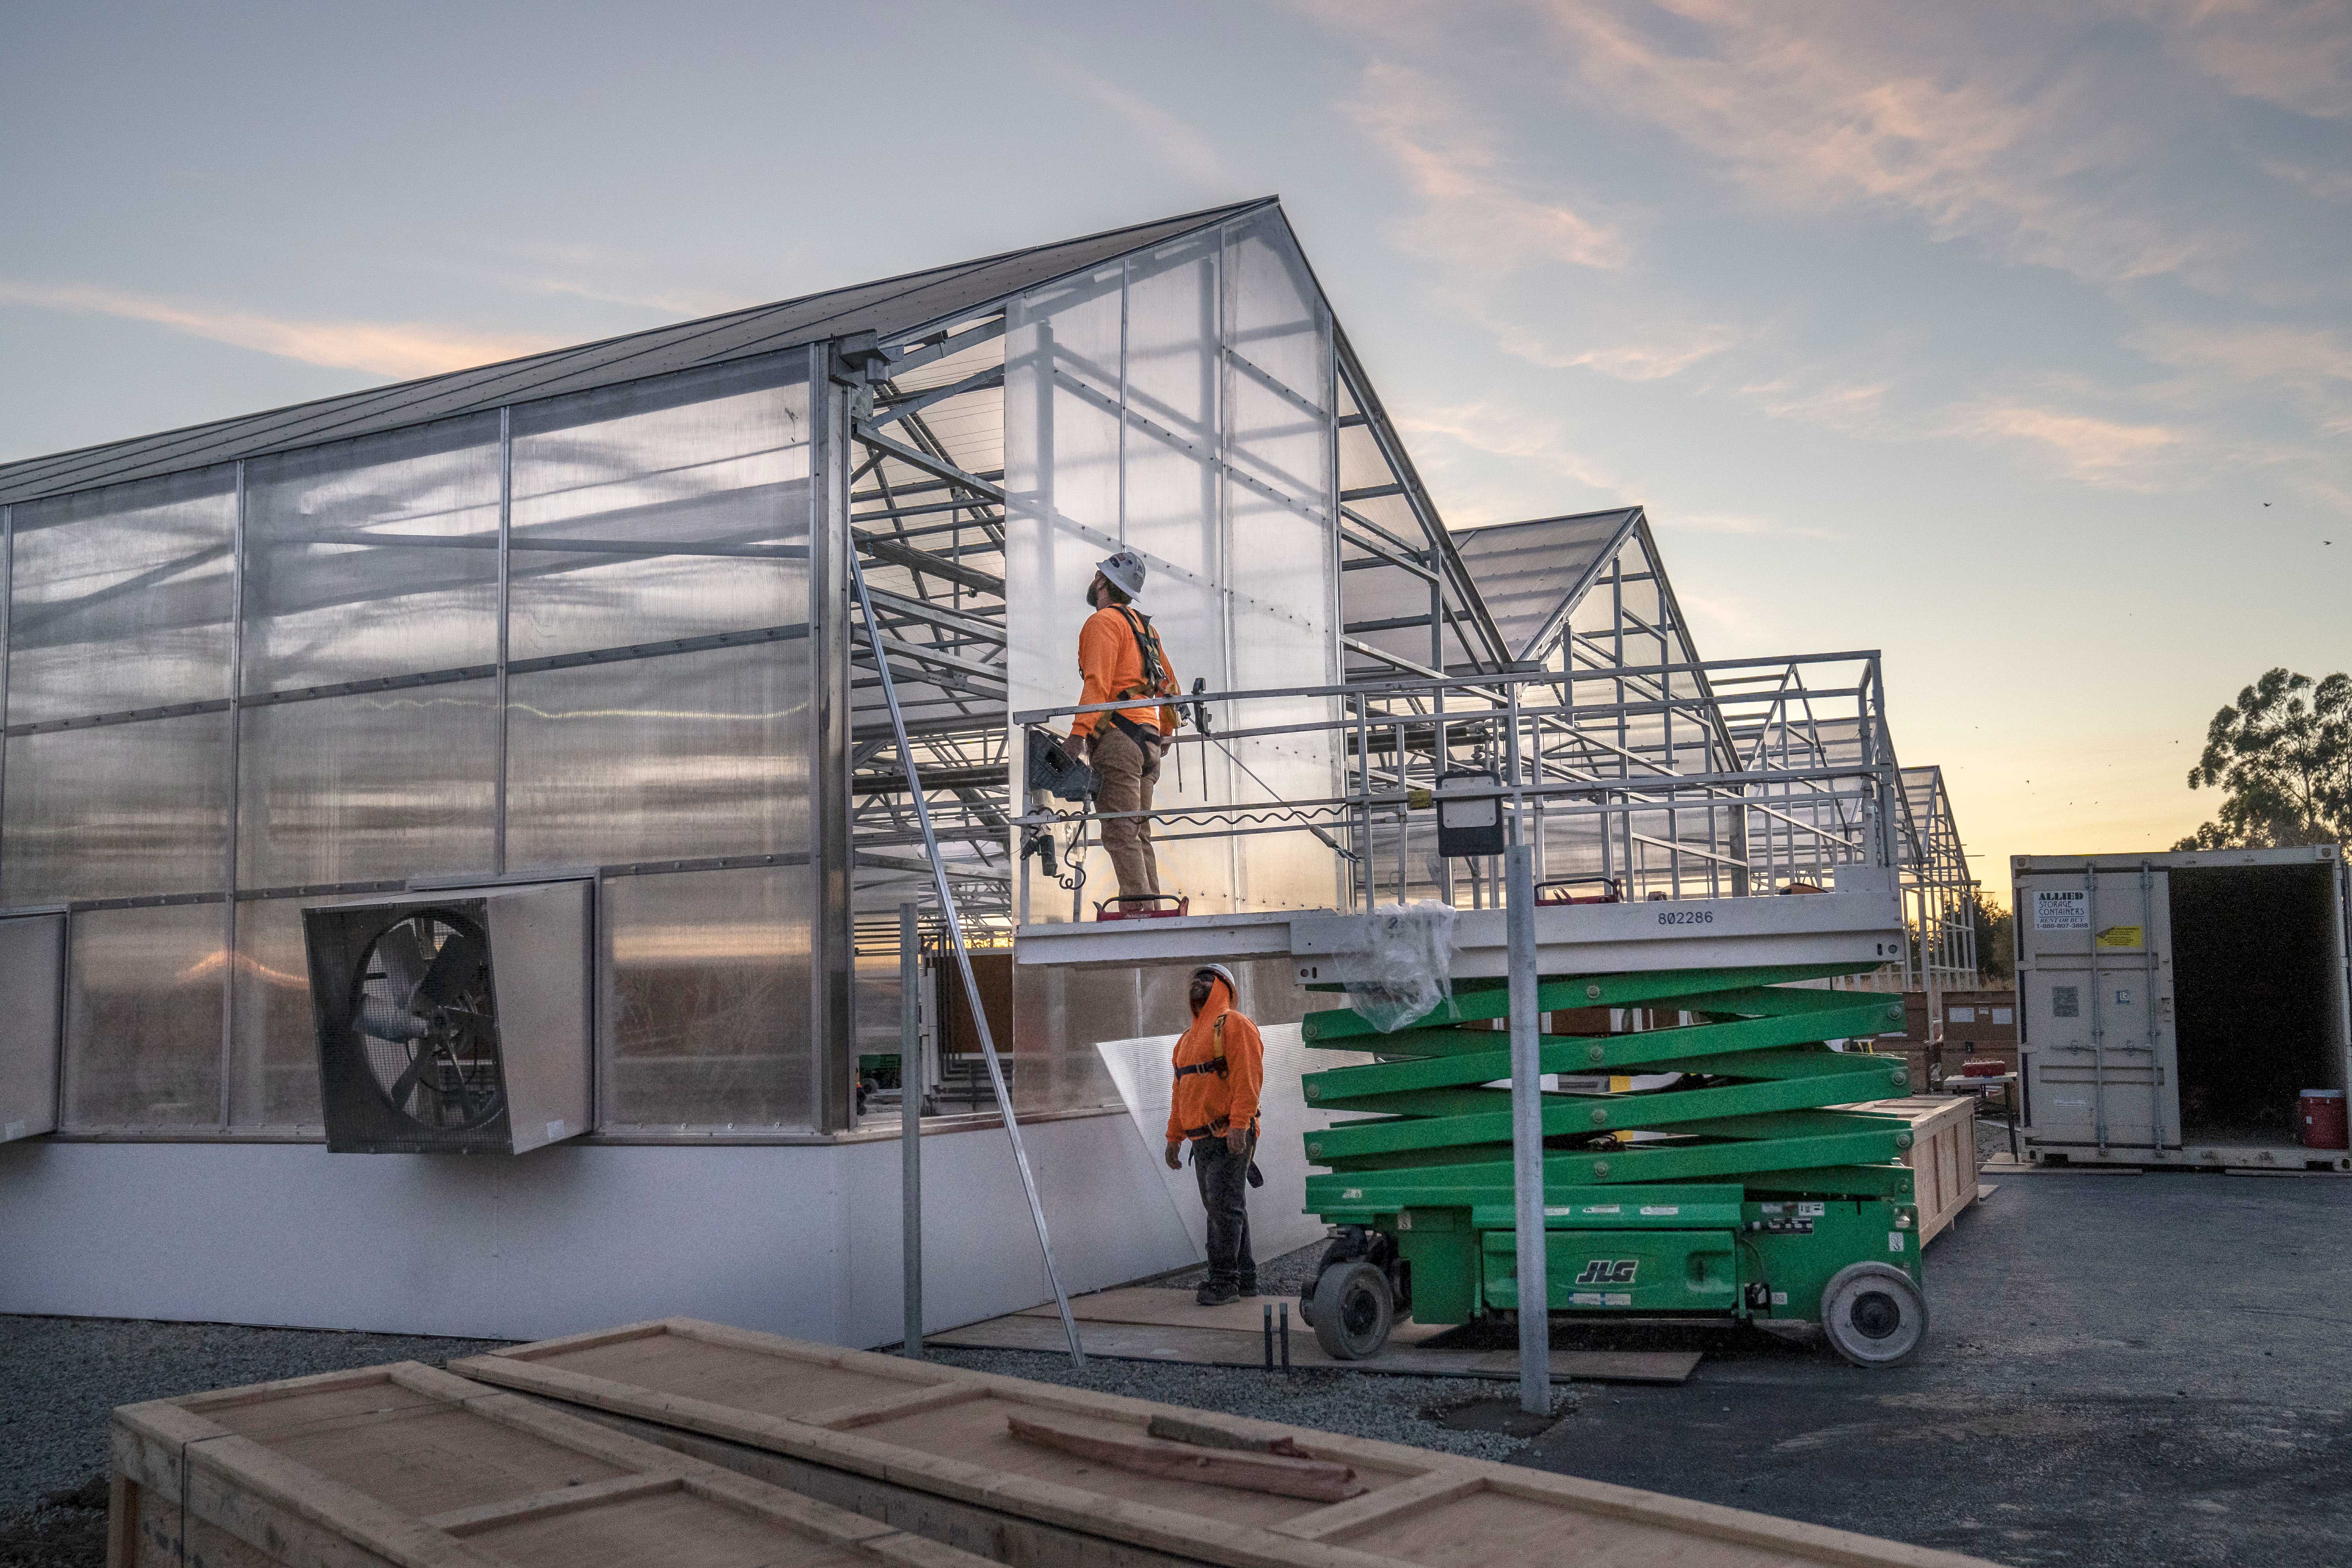 Construction is nearing completion on eight advanced greenhouses that will support breeding, teaching and research on an array of species including cacao, which is rarely studied at public institutions.